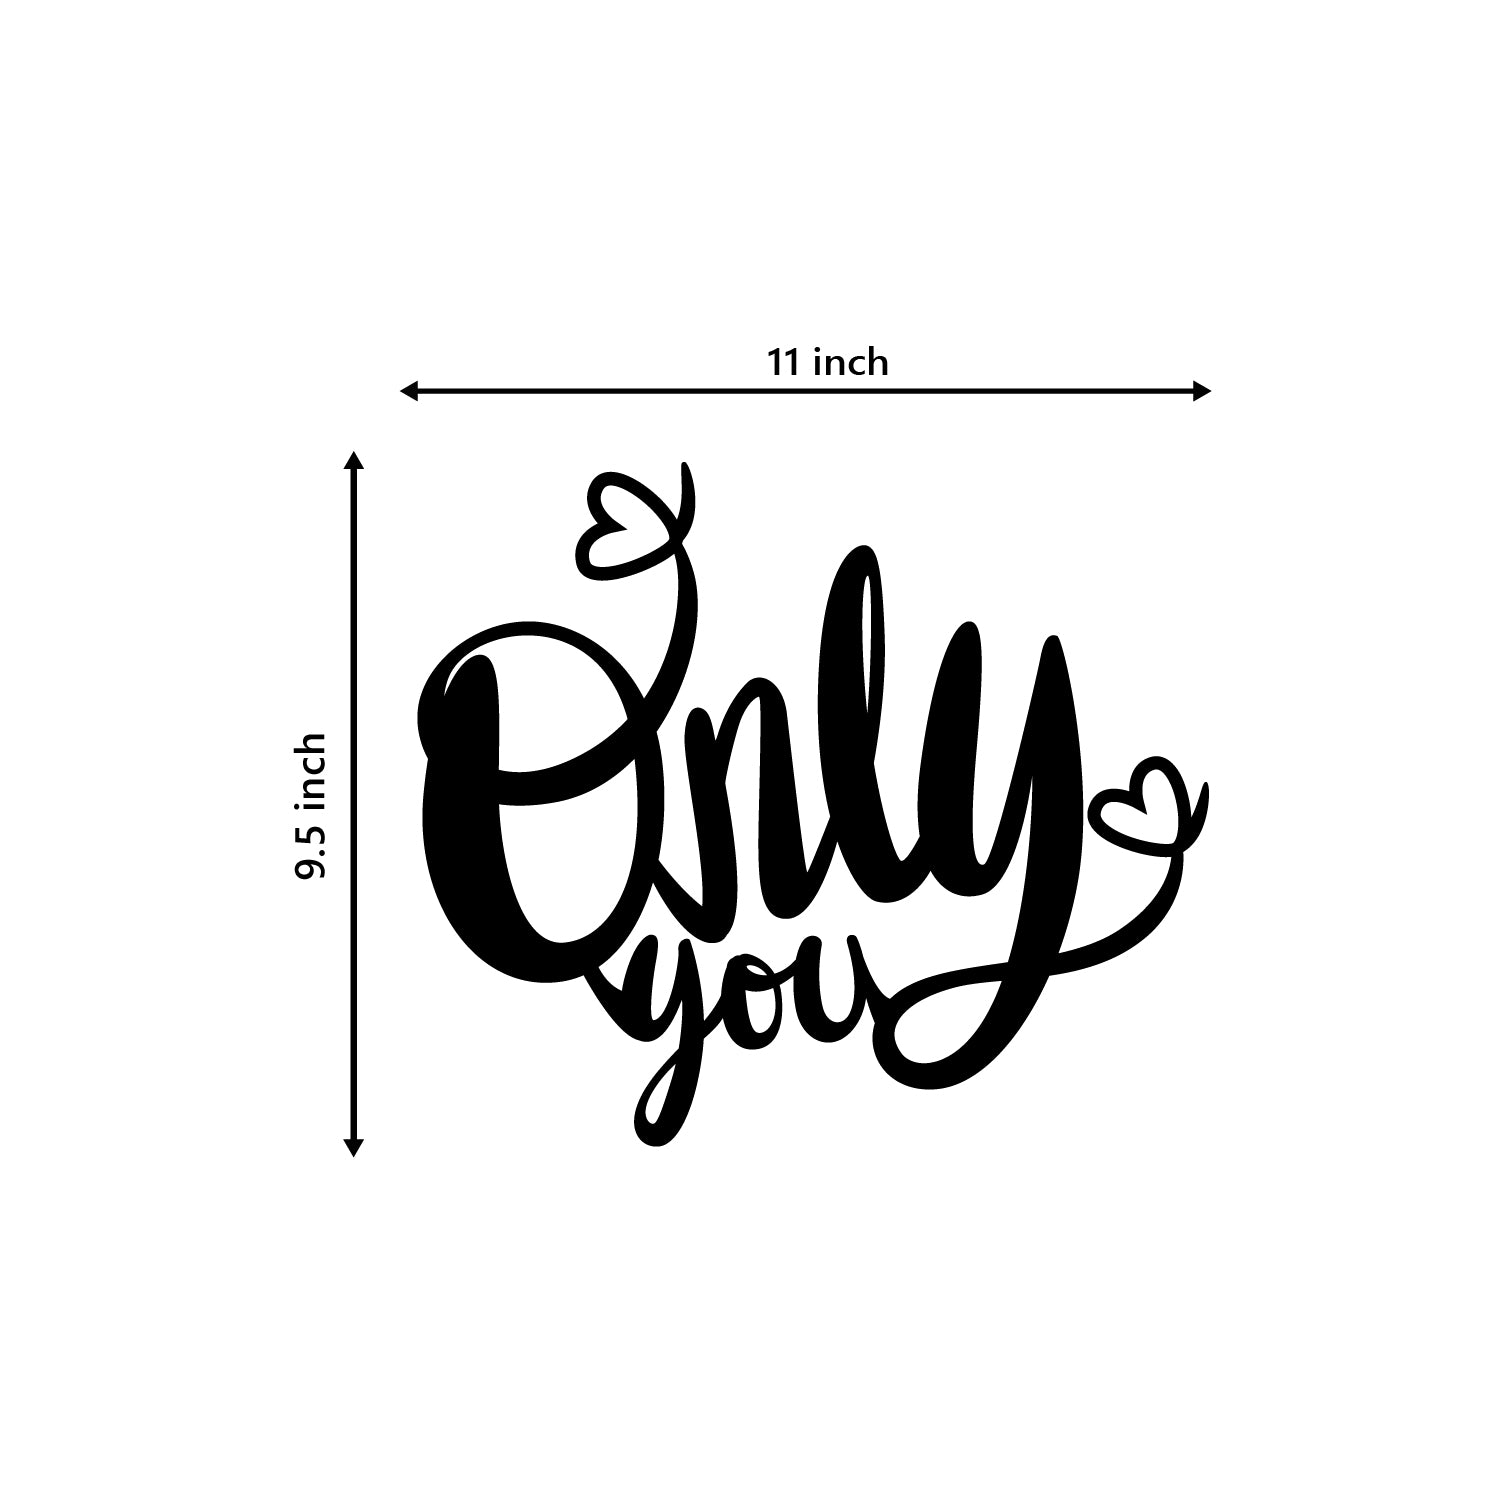 "Only You" Love Theme Black Engineered Wood Wall Art Cutout, Ready to Hang Home Decor 3